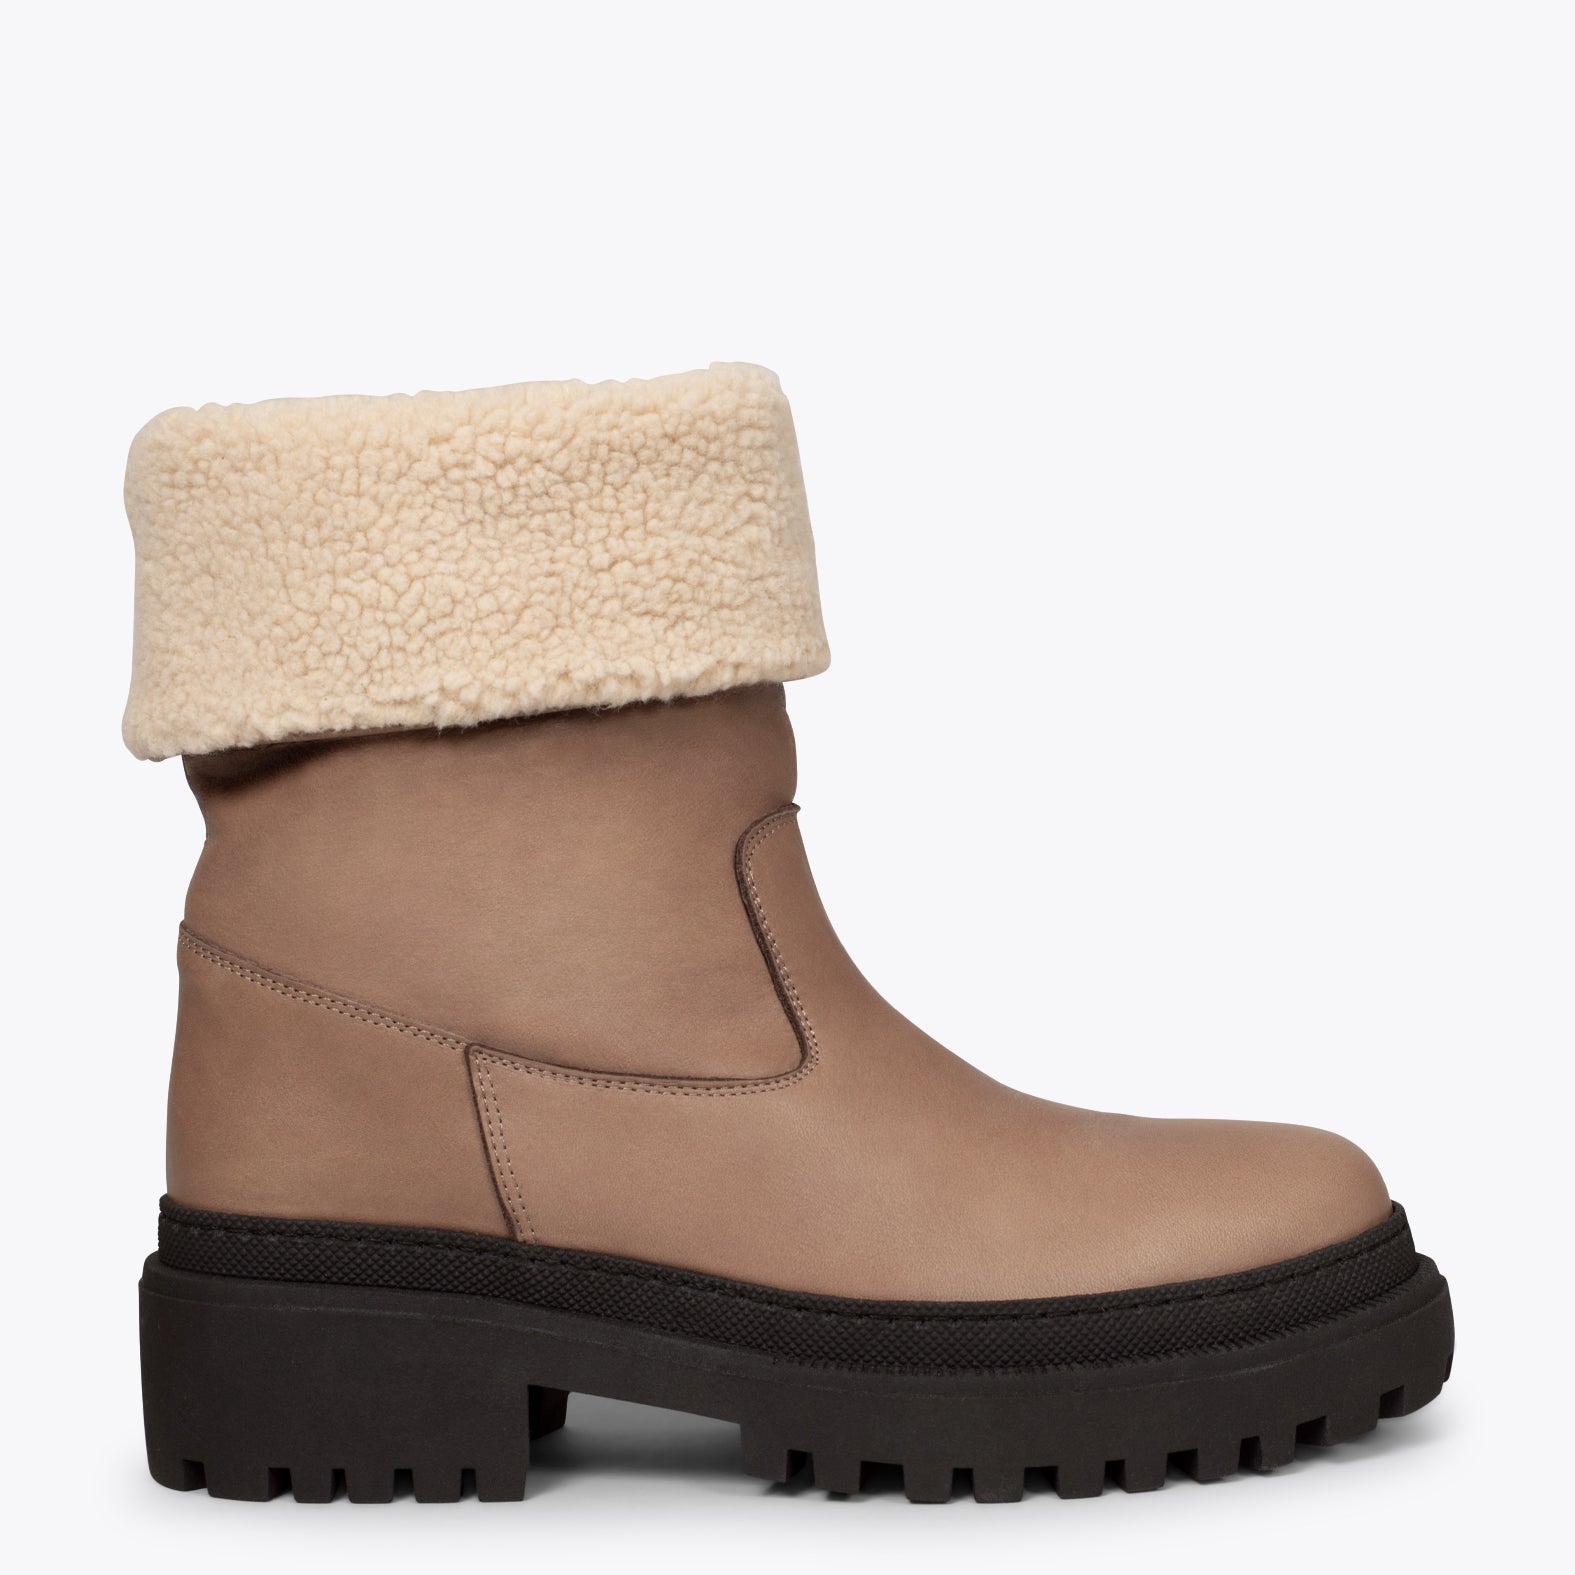 POLAR – TAUPE boot crafted in soft nappa leather